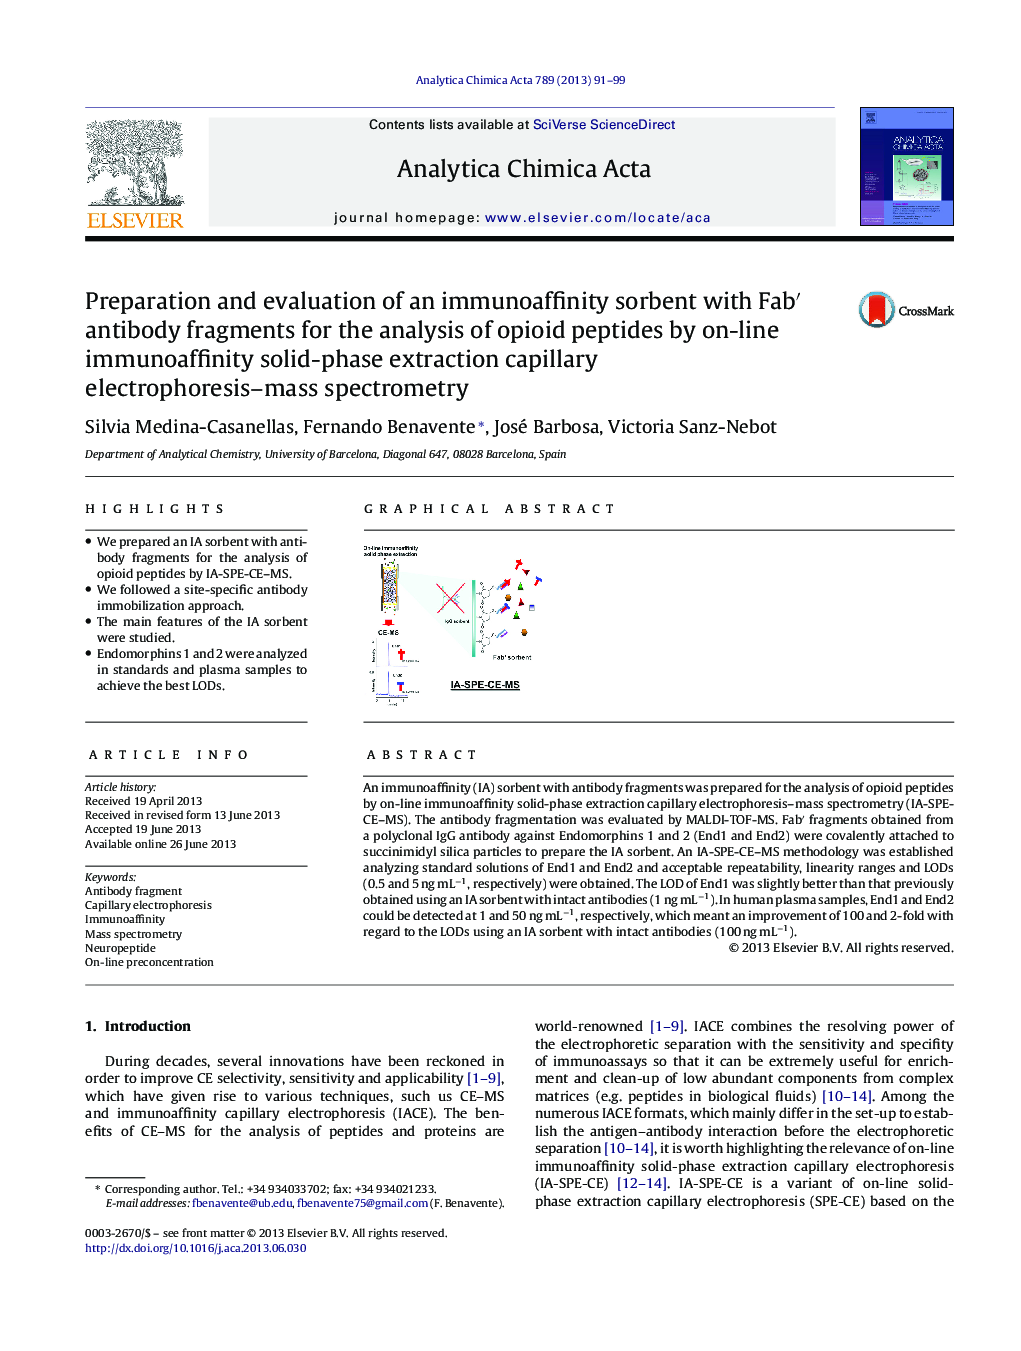 Preparation and evaluation of an immunoaffinity sorbent with Fab′ antibody fragments for the analysis of opioid peptides by on-line immunoaffinity solid-phase extraction capillary electrophoresis–mass spectrometry